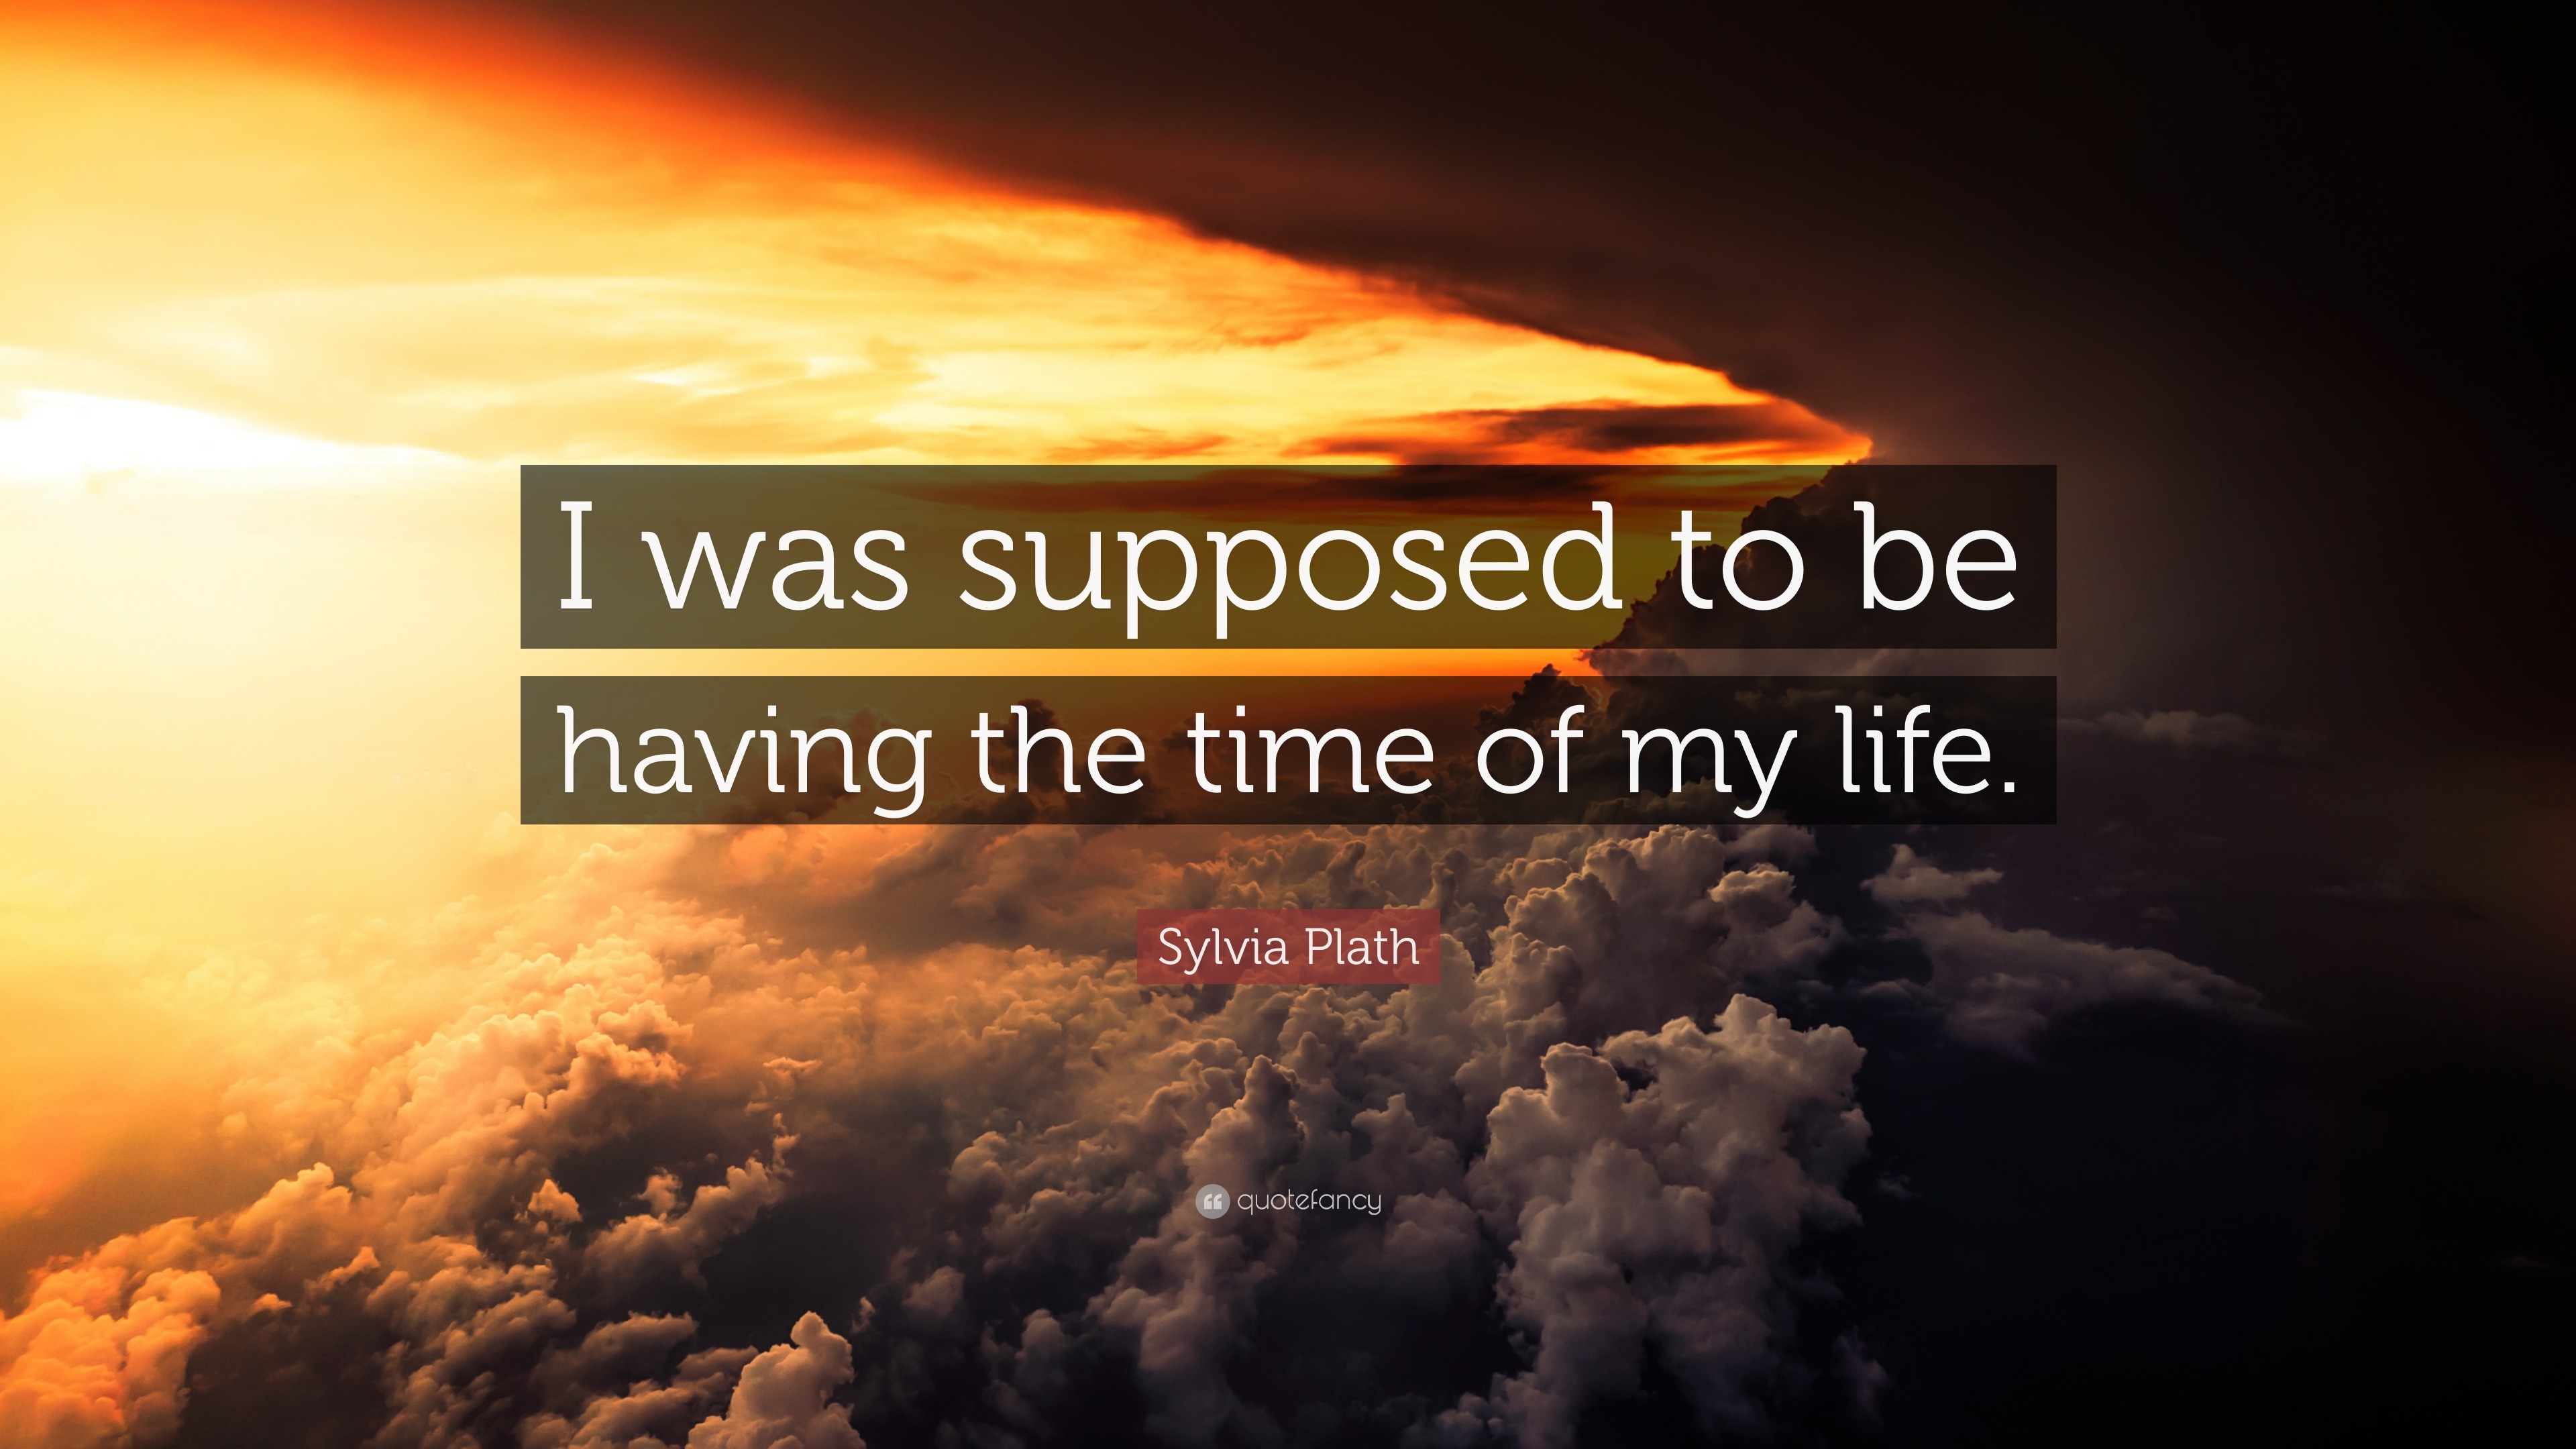 Sylvia Plath Quote “I was supposed to be having the time of my life